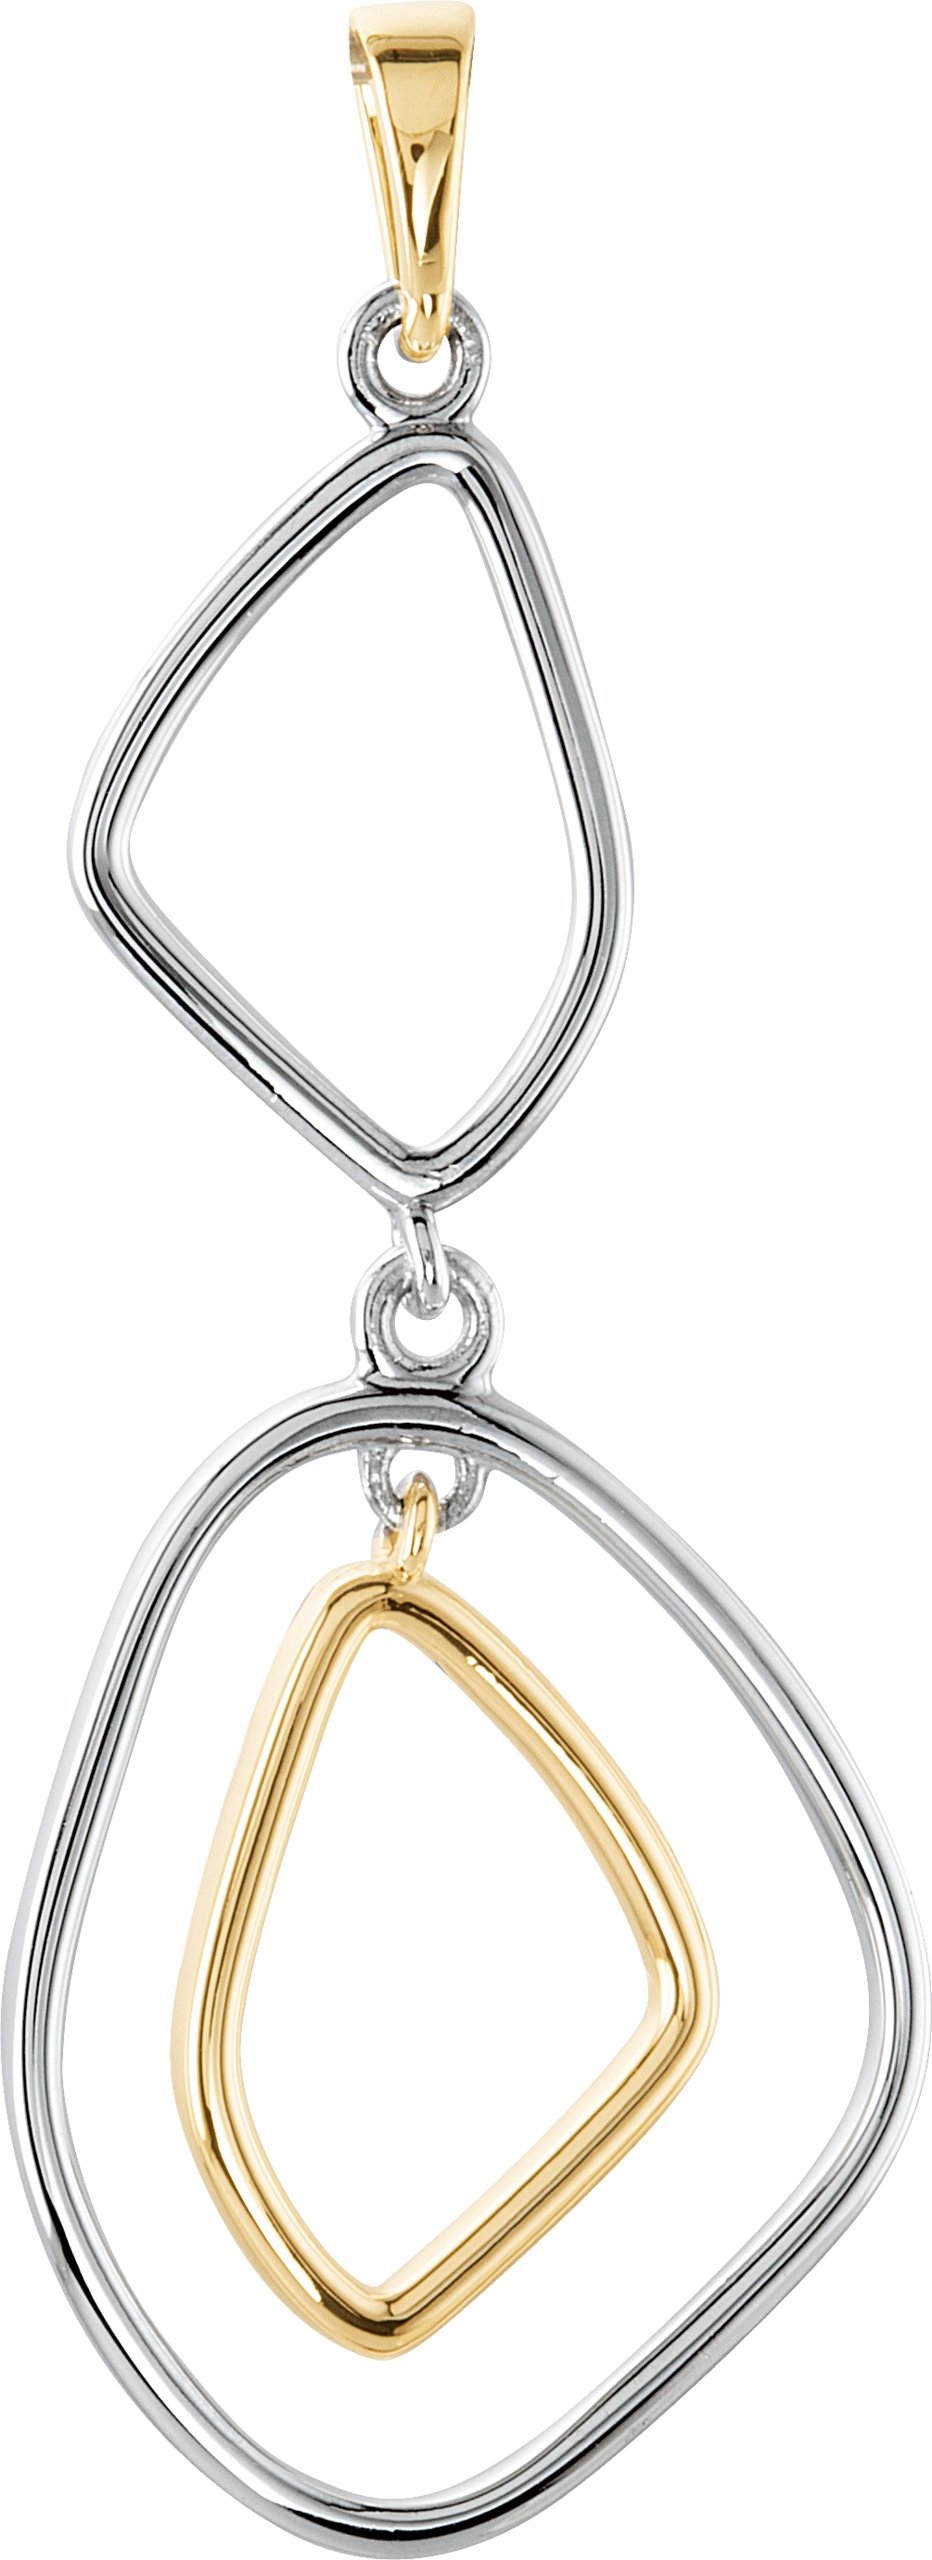 Sterling Silver and 14K Yellow Open Silhouette Pendant Ref. 3470688